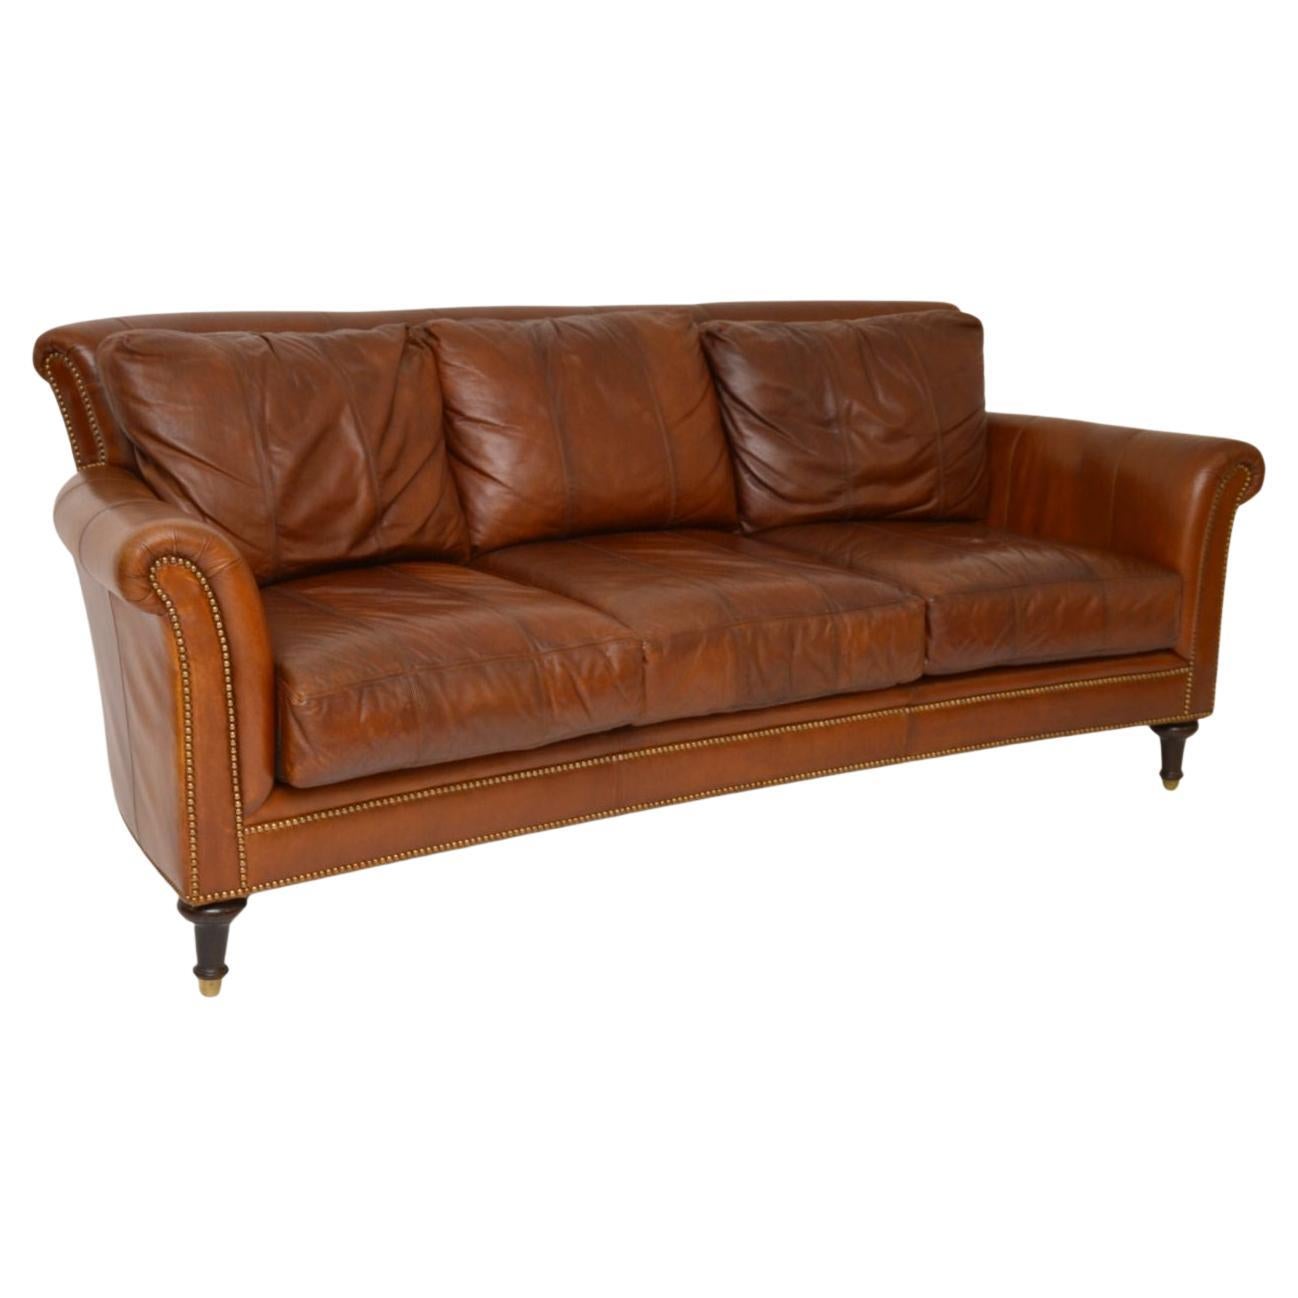 Antique Victorian Style Vintage Leather Sofa